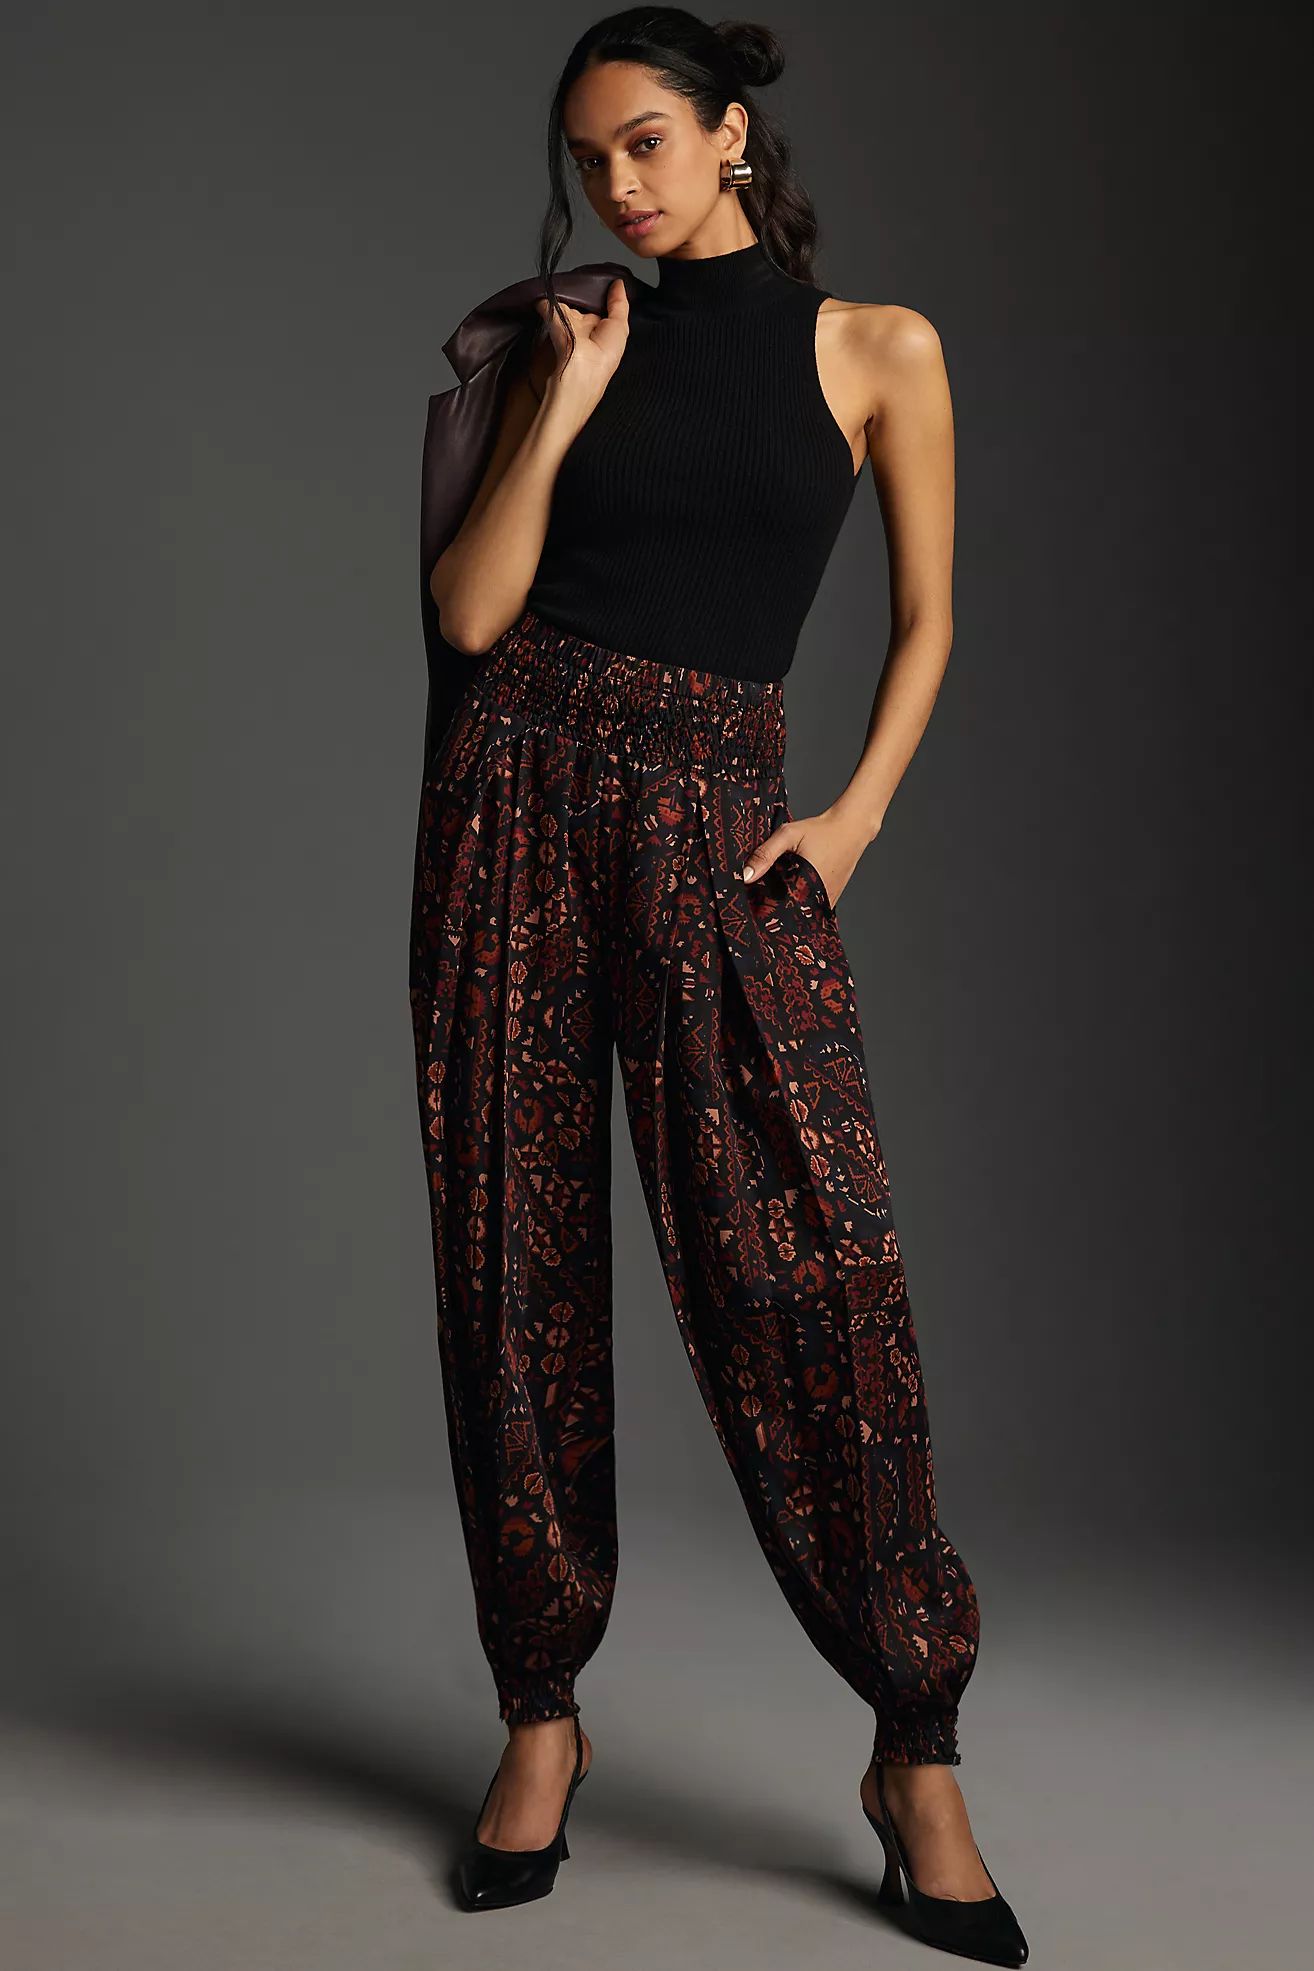 By Anthropologie Silky Joggers | Anthropologie (US)